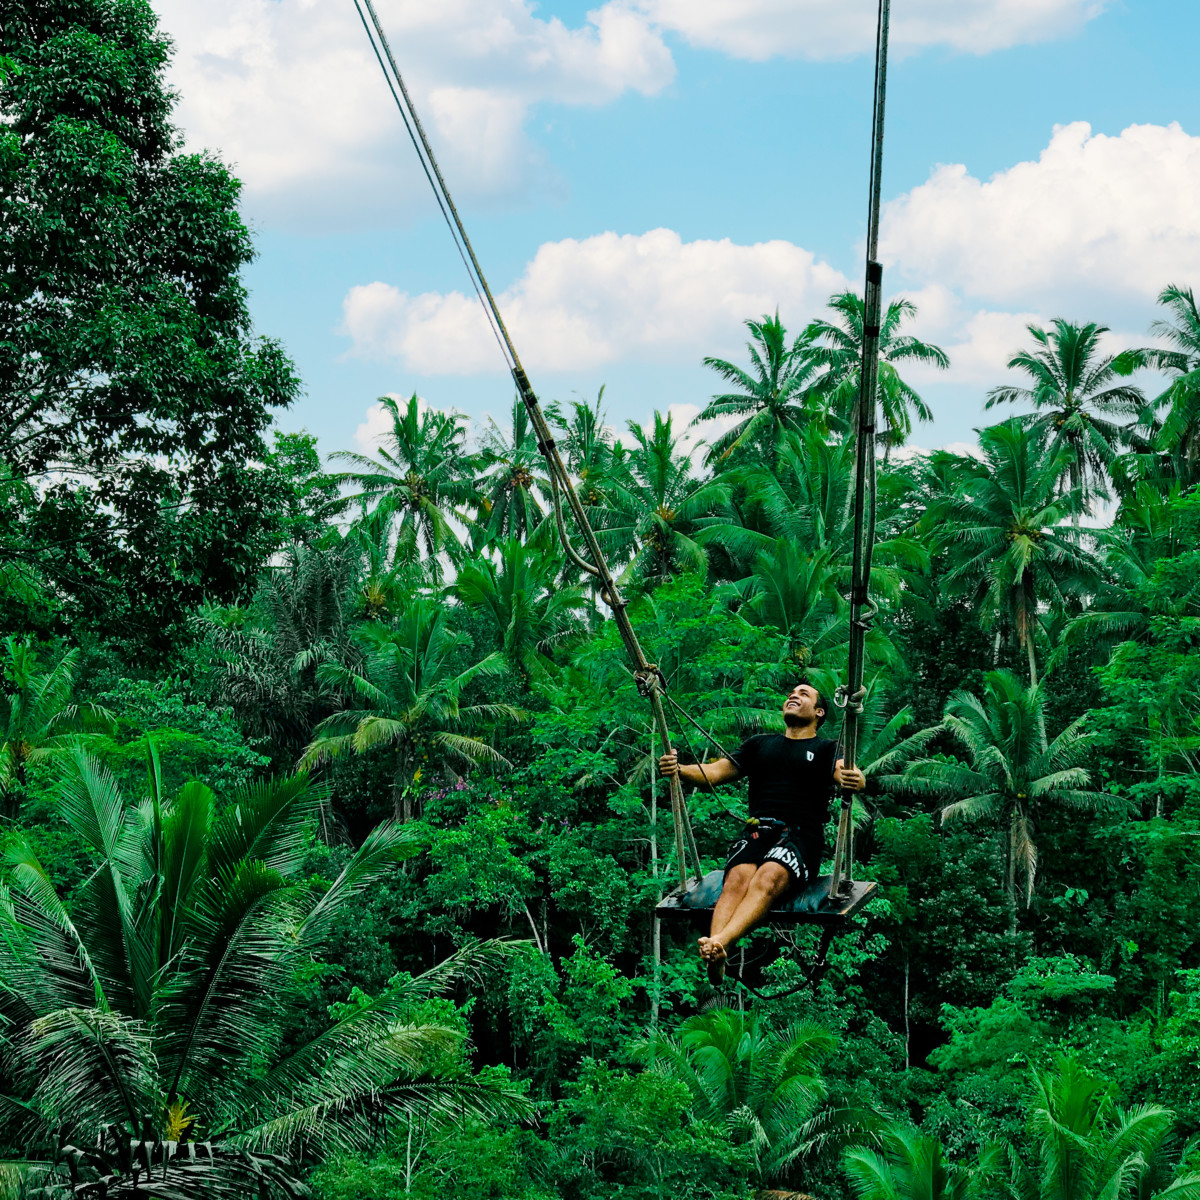 Phillip Lew on a large swing swinging over the jungle